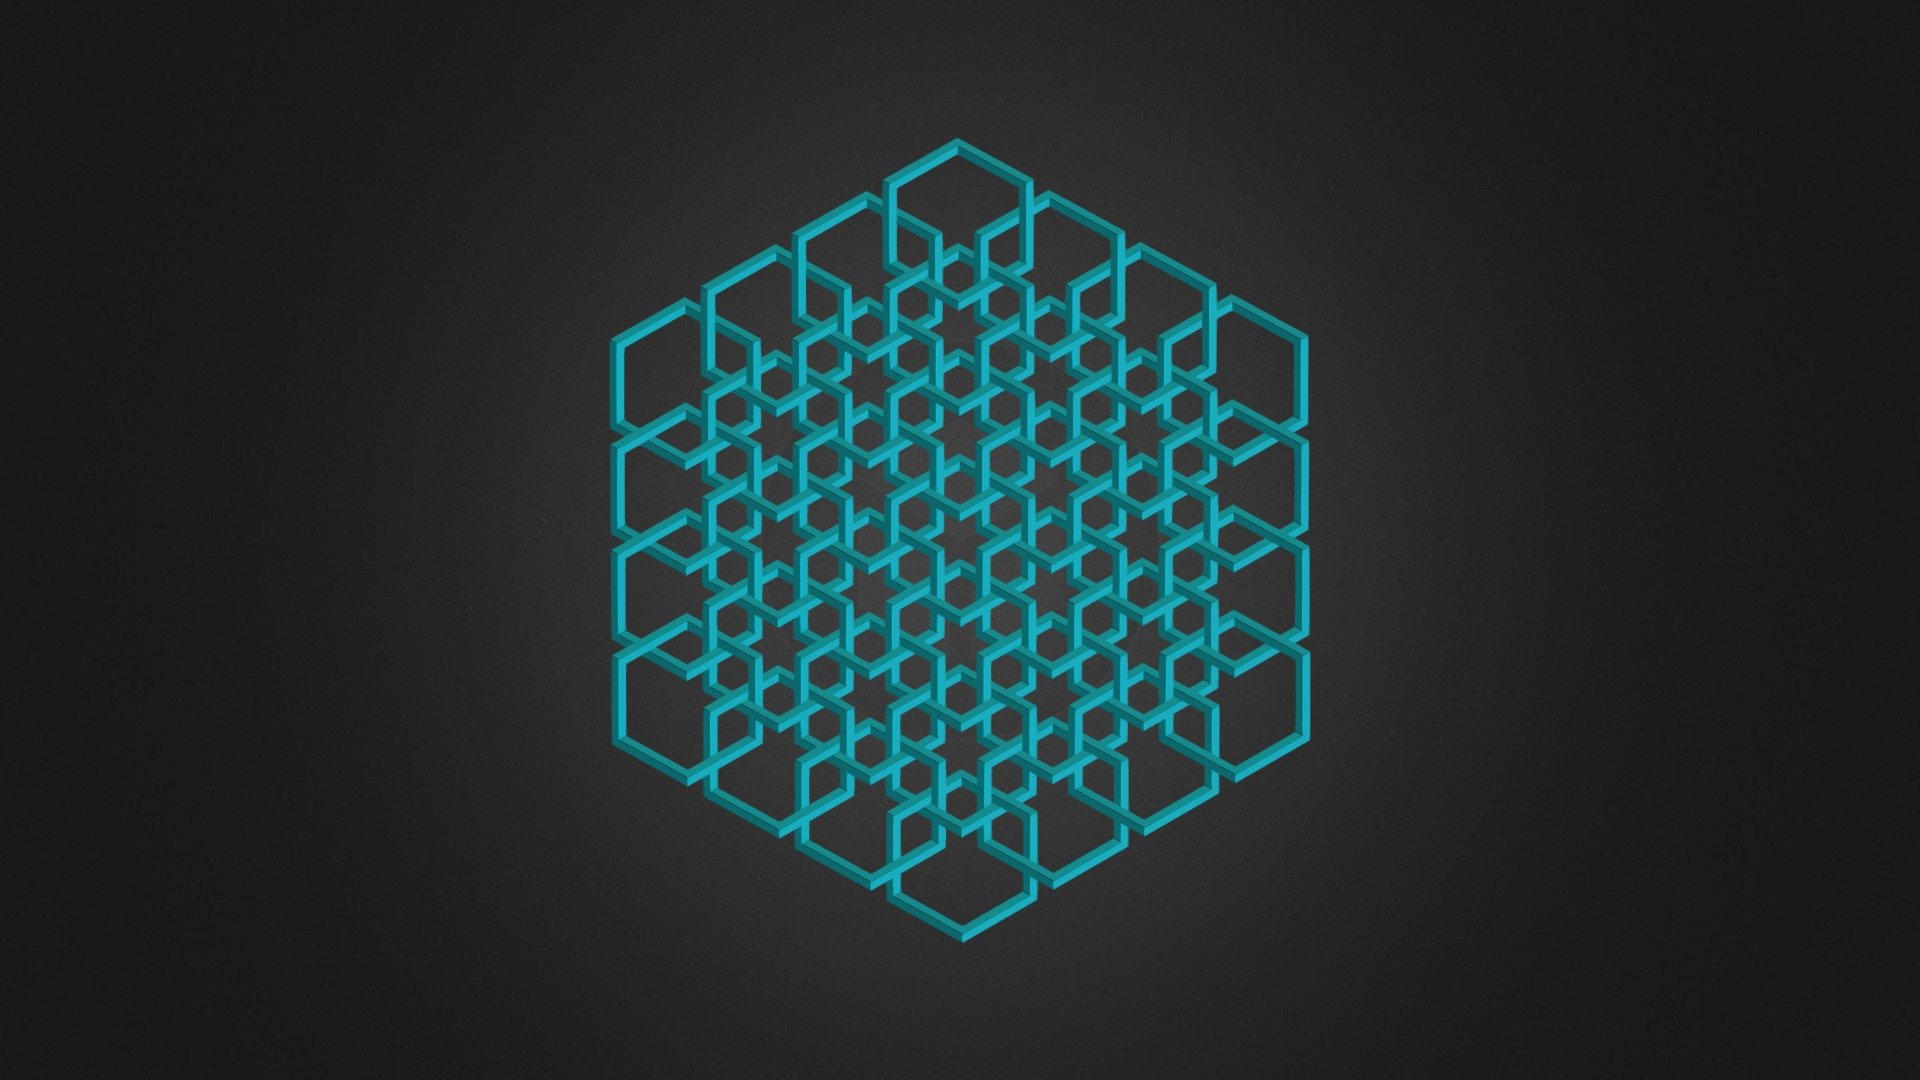 Hexagon based pattern reinterpreted as an isometric view of a cubic 3D structure.  



2D reference picture ▲  (bottom &ldquo;343